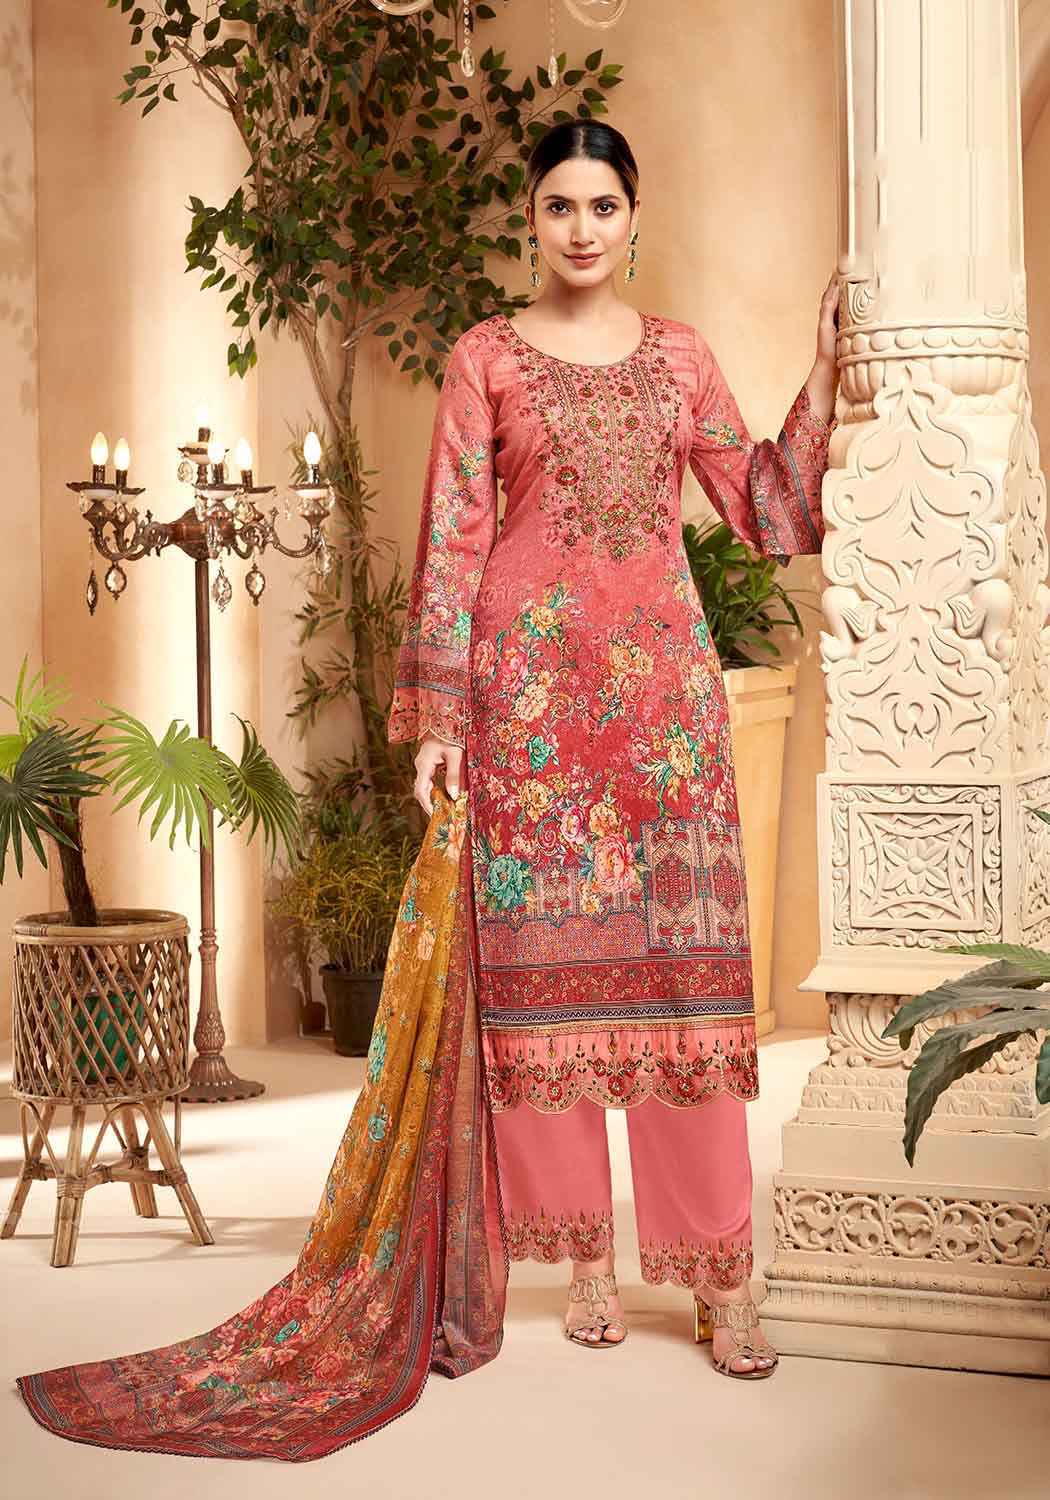 Unstitched Pakistani Print Cotton Suit Material with Embroidery